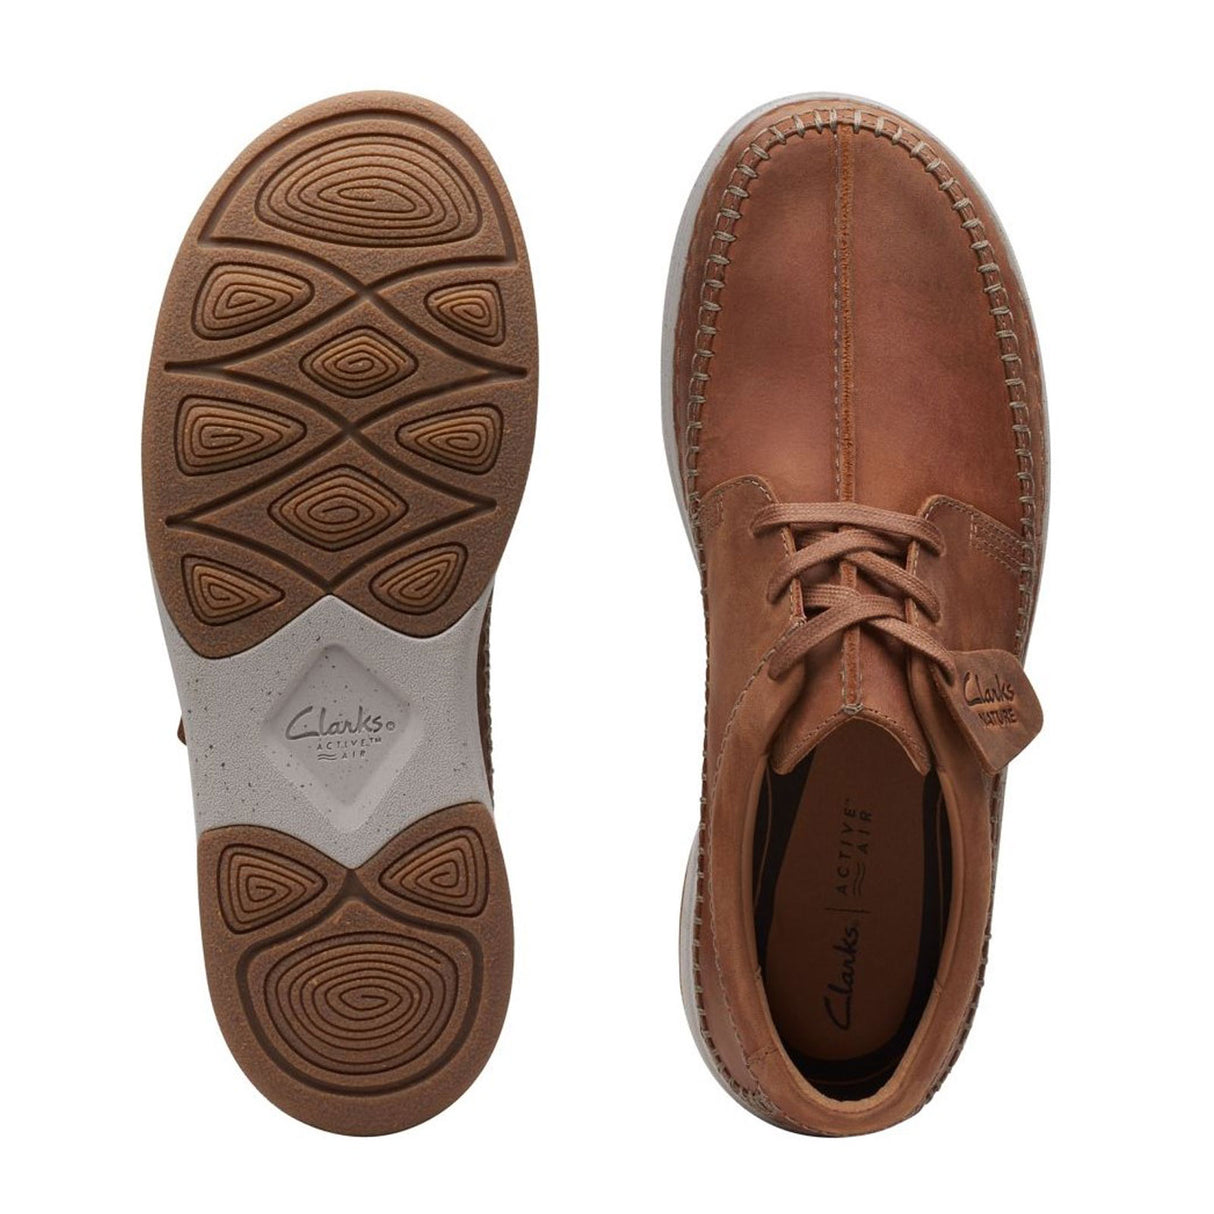 Clarks Nature 5 Tie Lace-up Shoe (Men) - Beeswax Leather